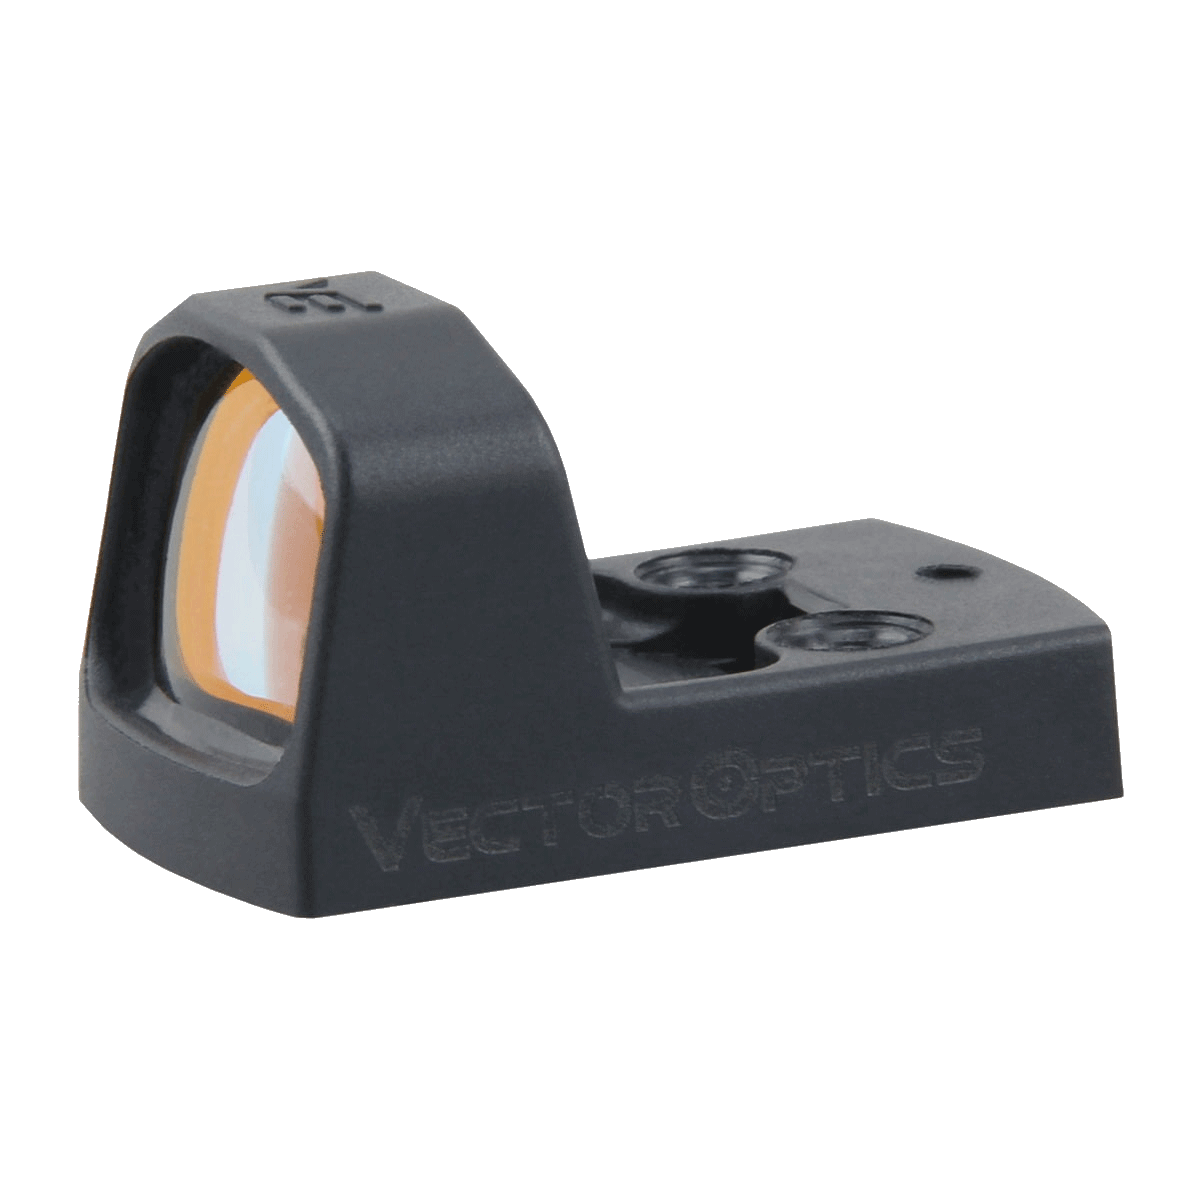 Frenzy-S 1x16x22 Engineering Polymer AUT Red Dot Sight